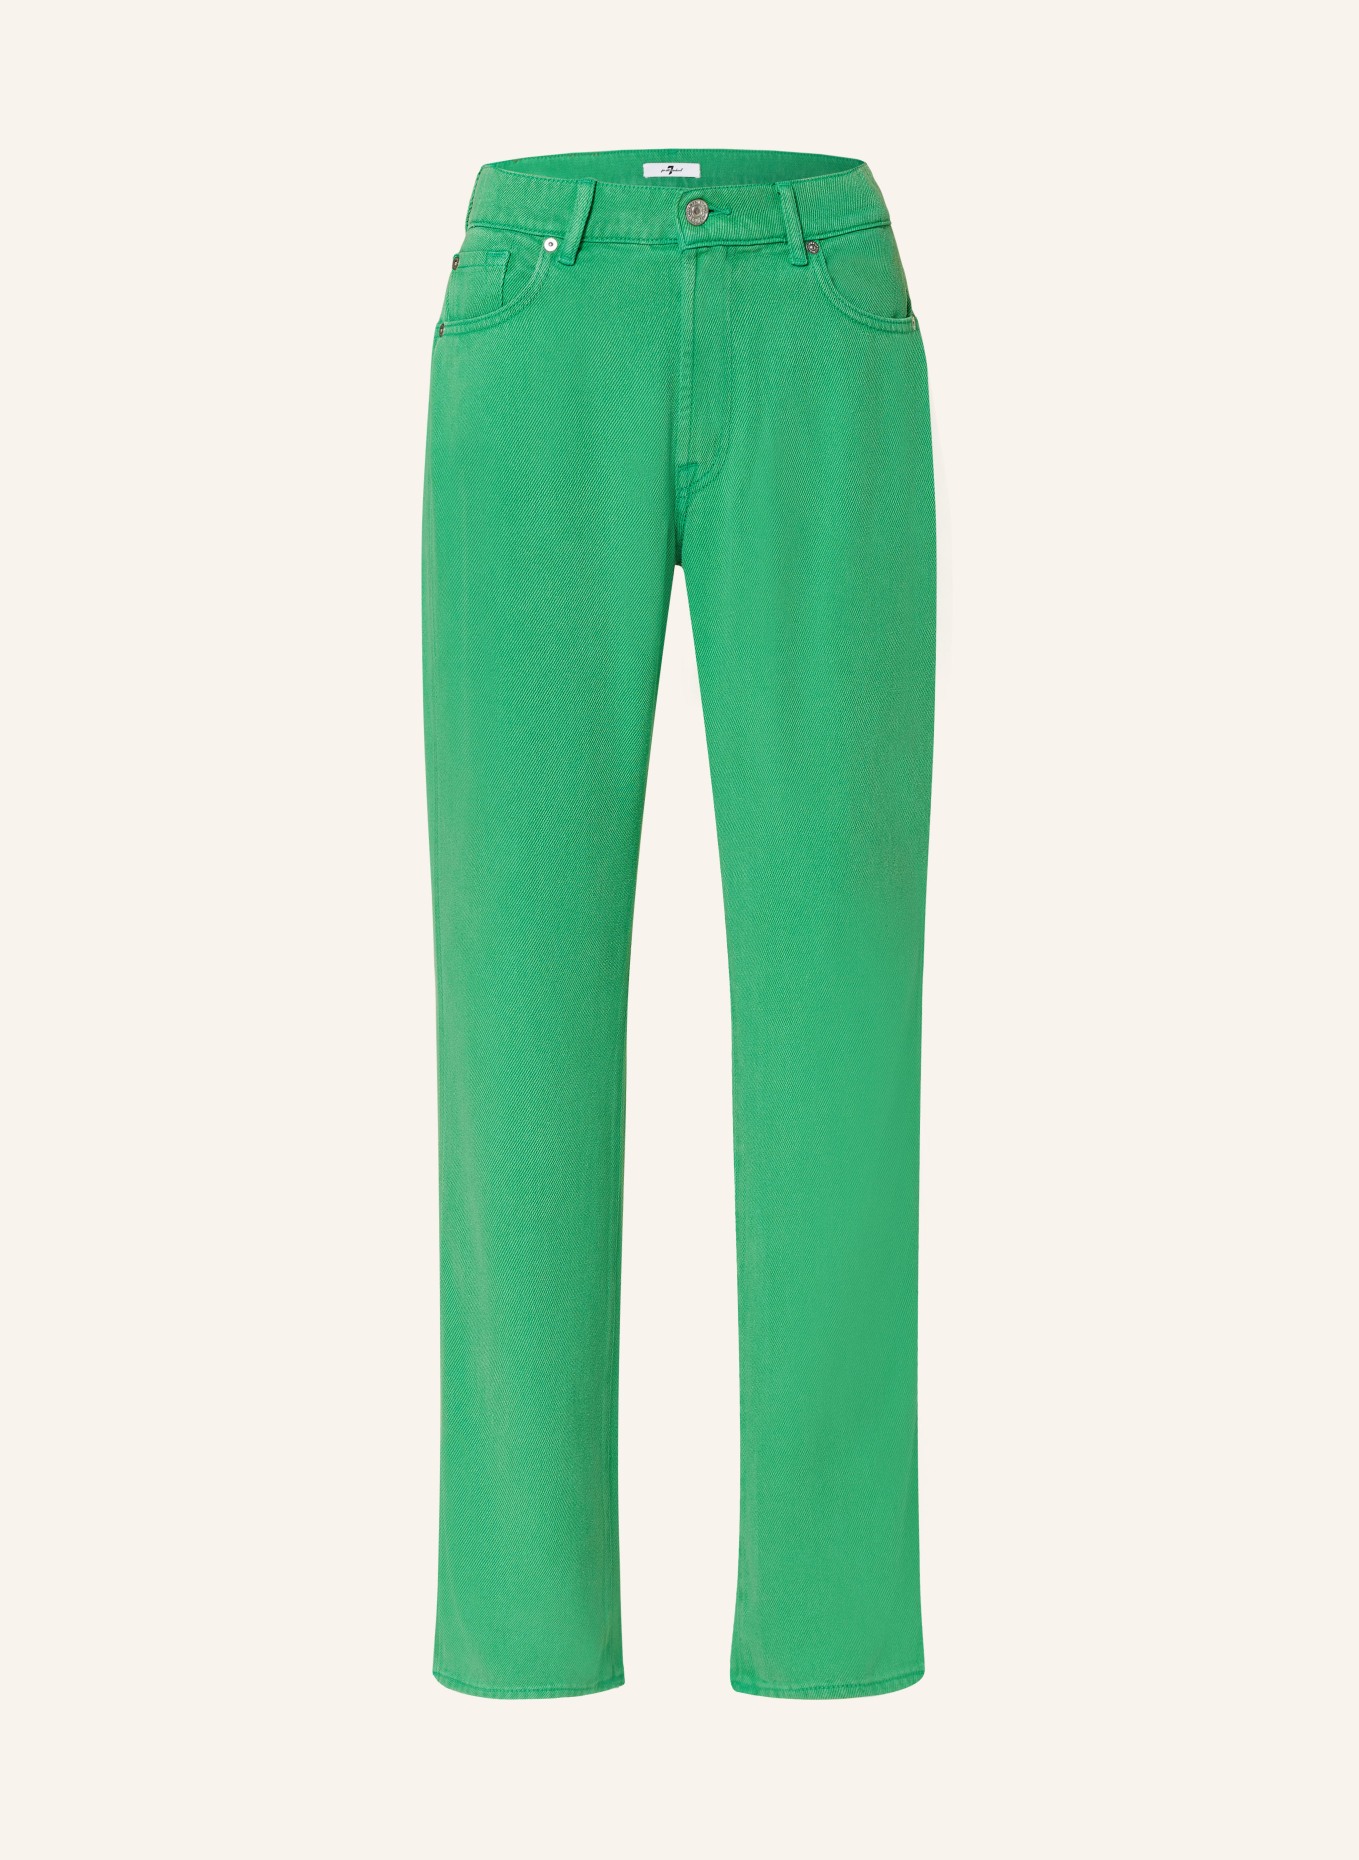 7 for all mankind Jeans, Farbe: GREEN (Bild 1)